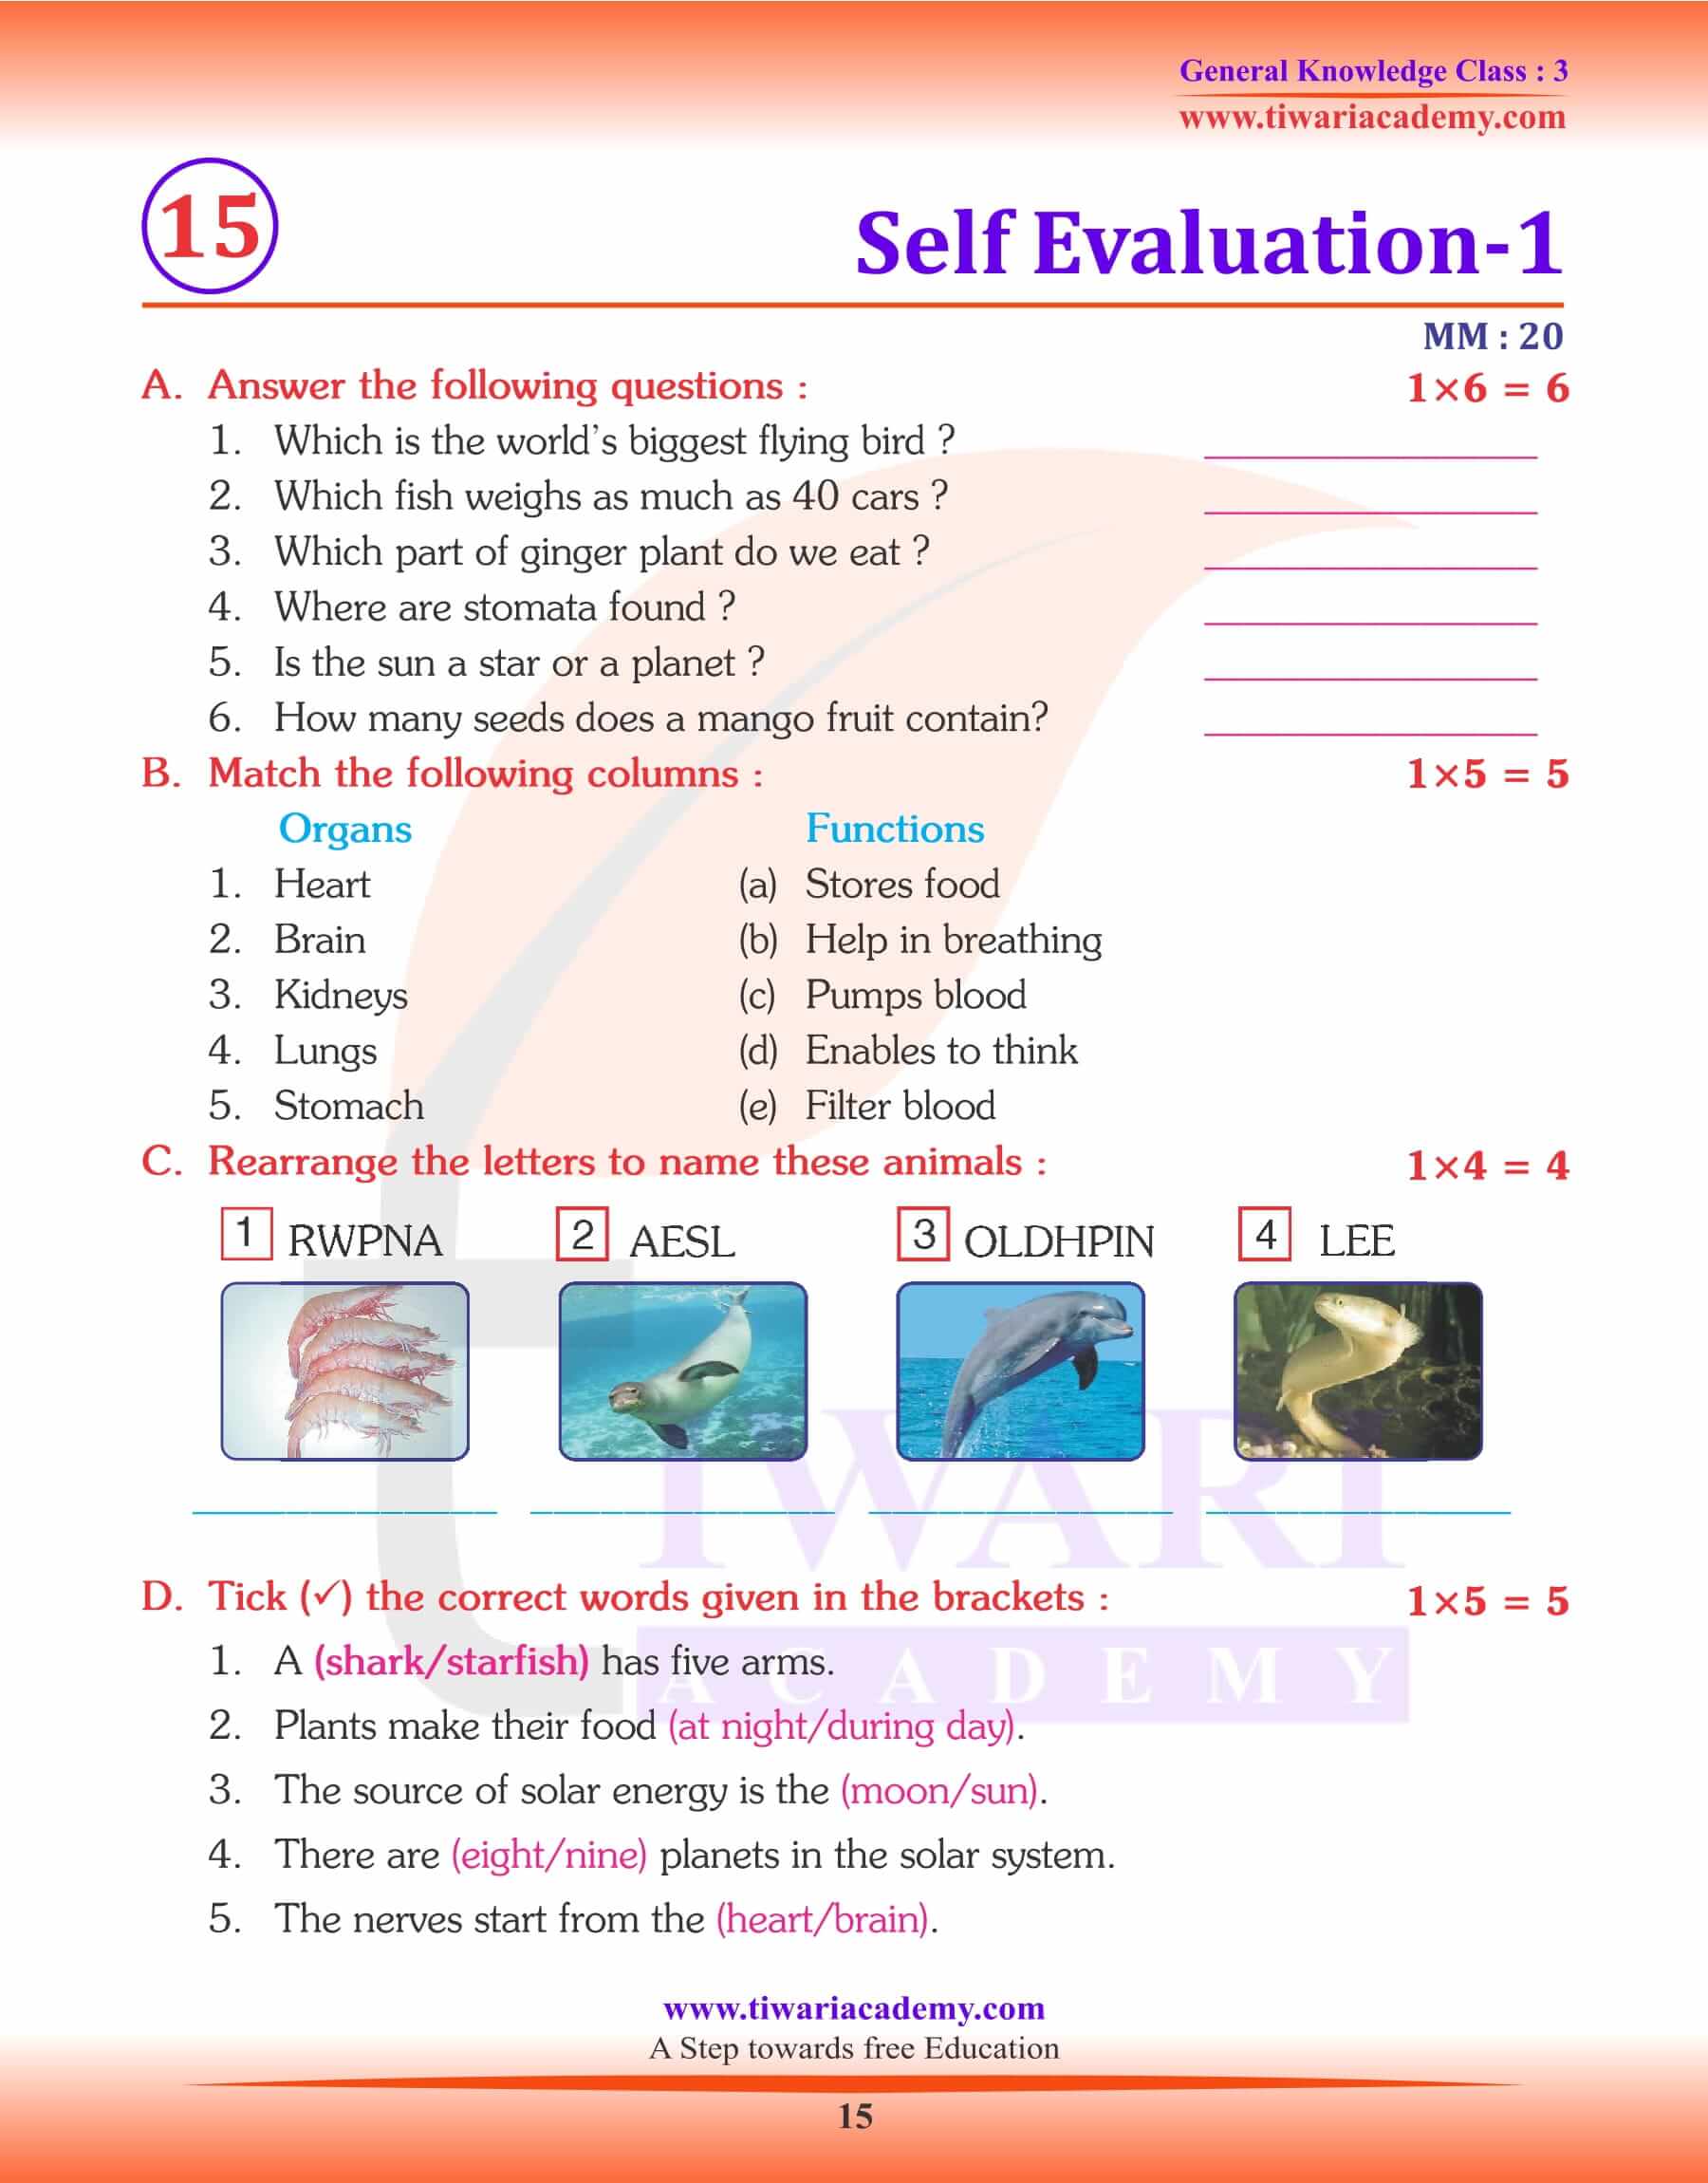 Class 3 General Knowledge Questions Answers book GK Tests